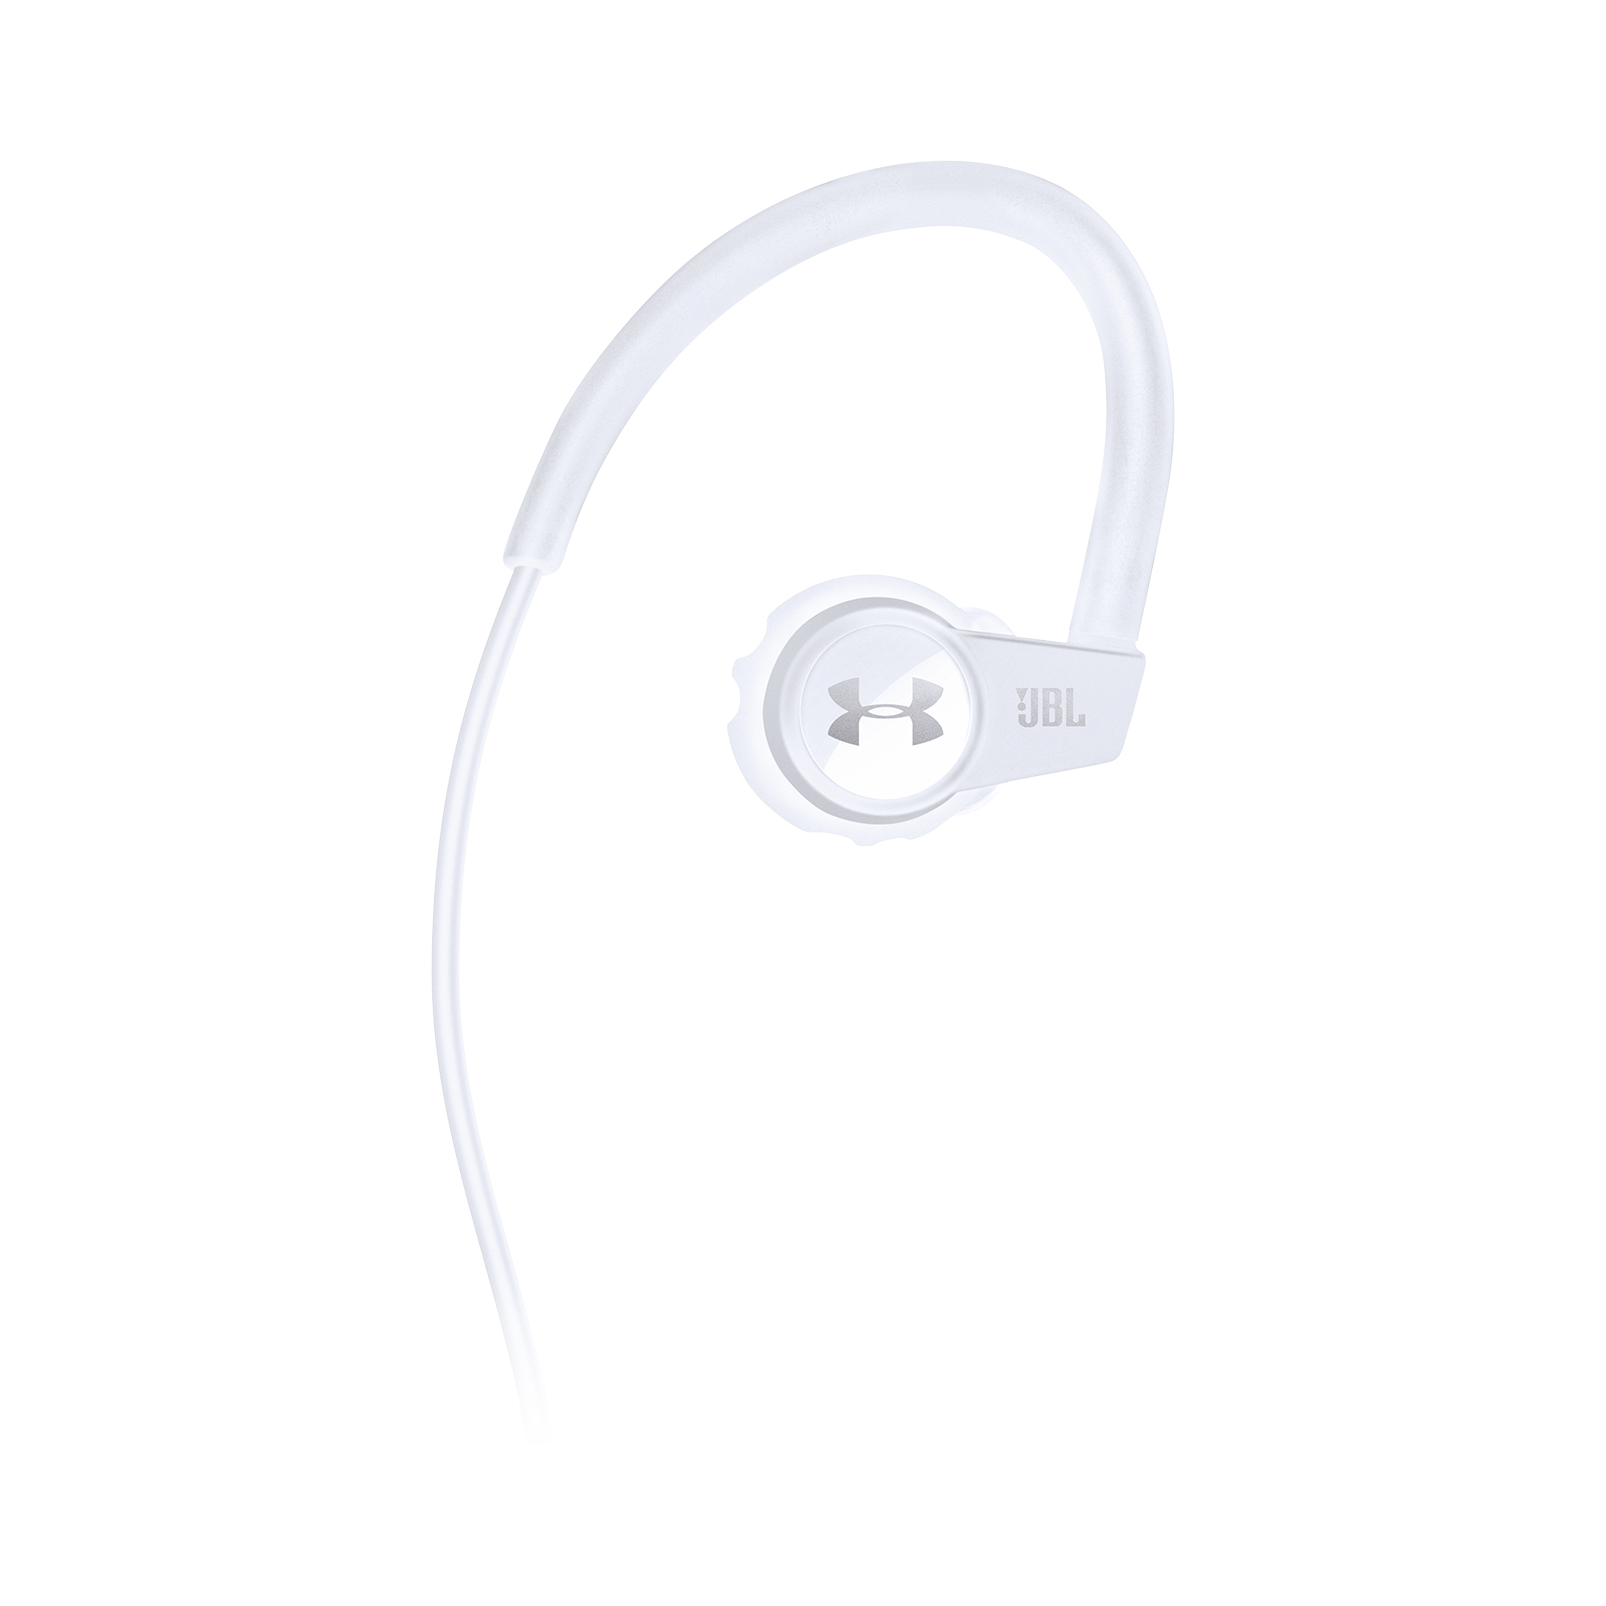 Under Armour Sport Wireless Heart Rate - White - Heart rate monitoring, wireless in-ear headphones for athletes - Front